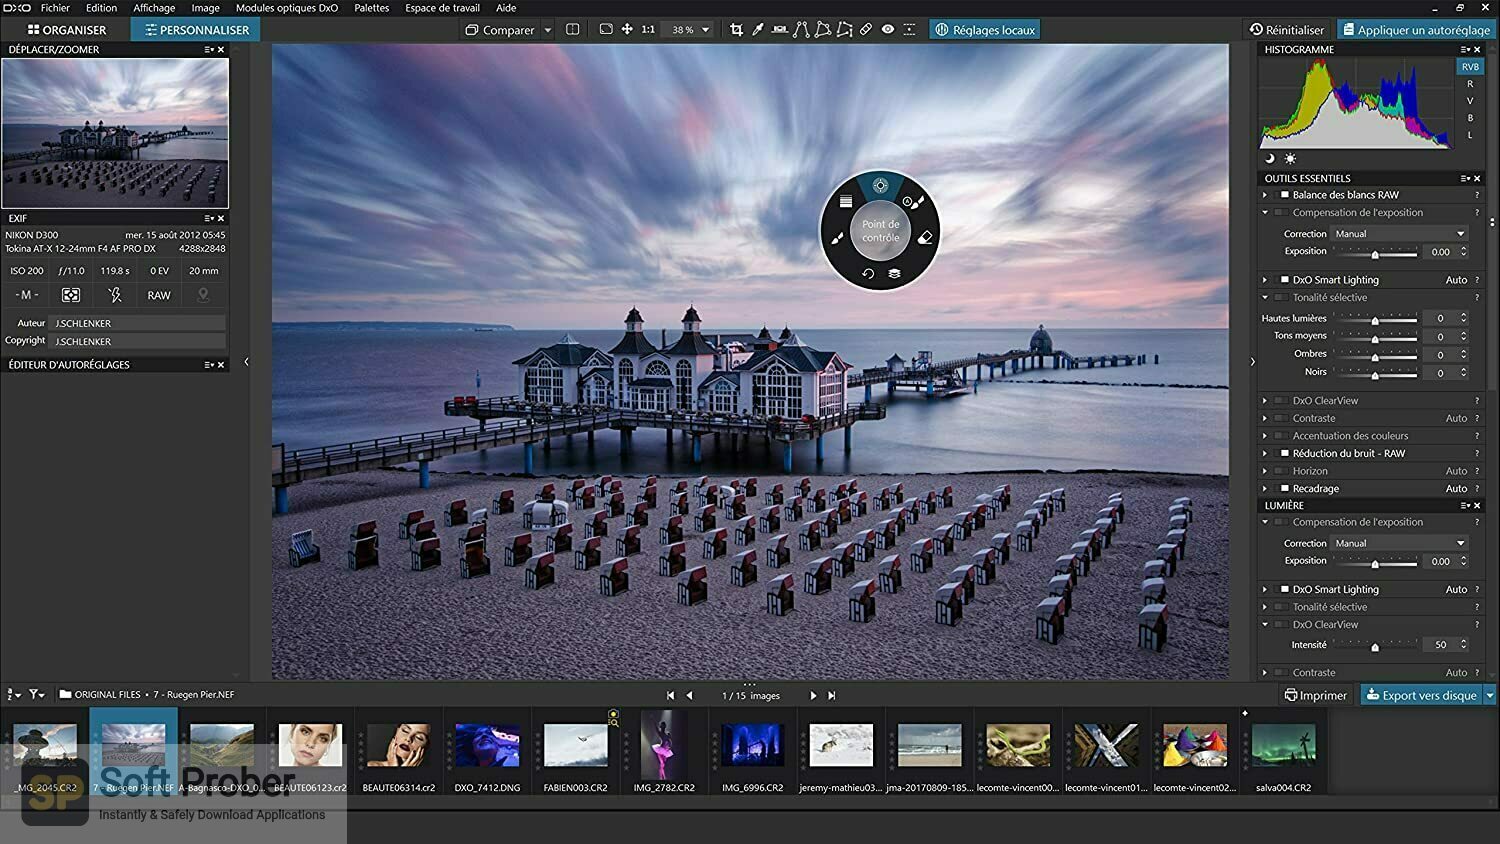 free for mac download DxO ViewPoint 4.10.0.250